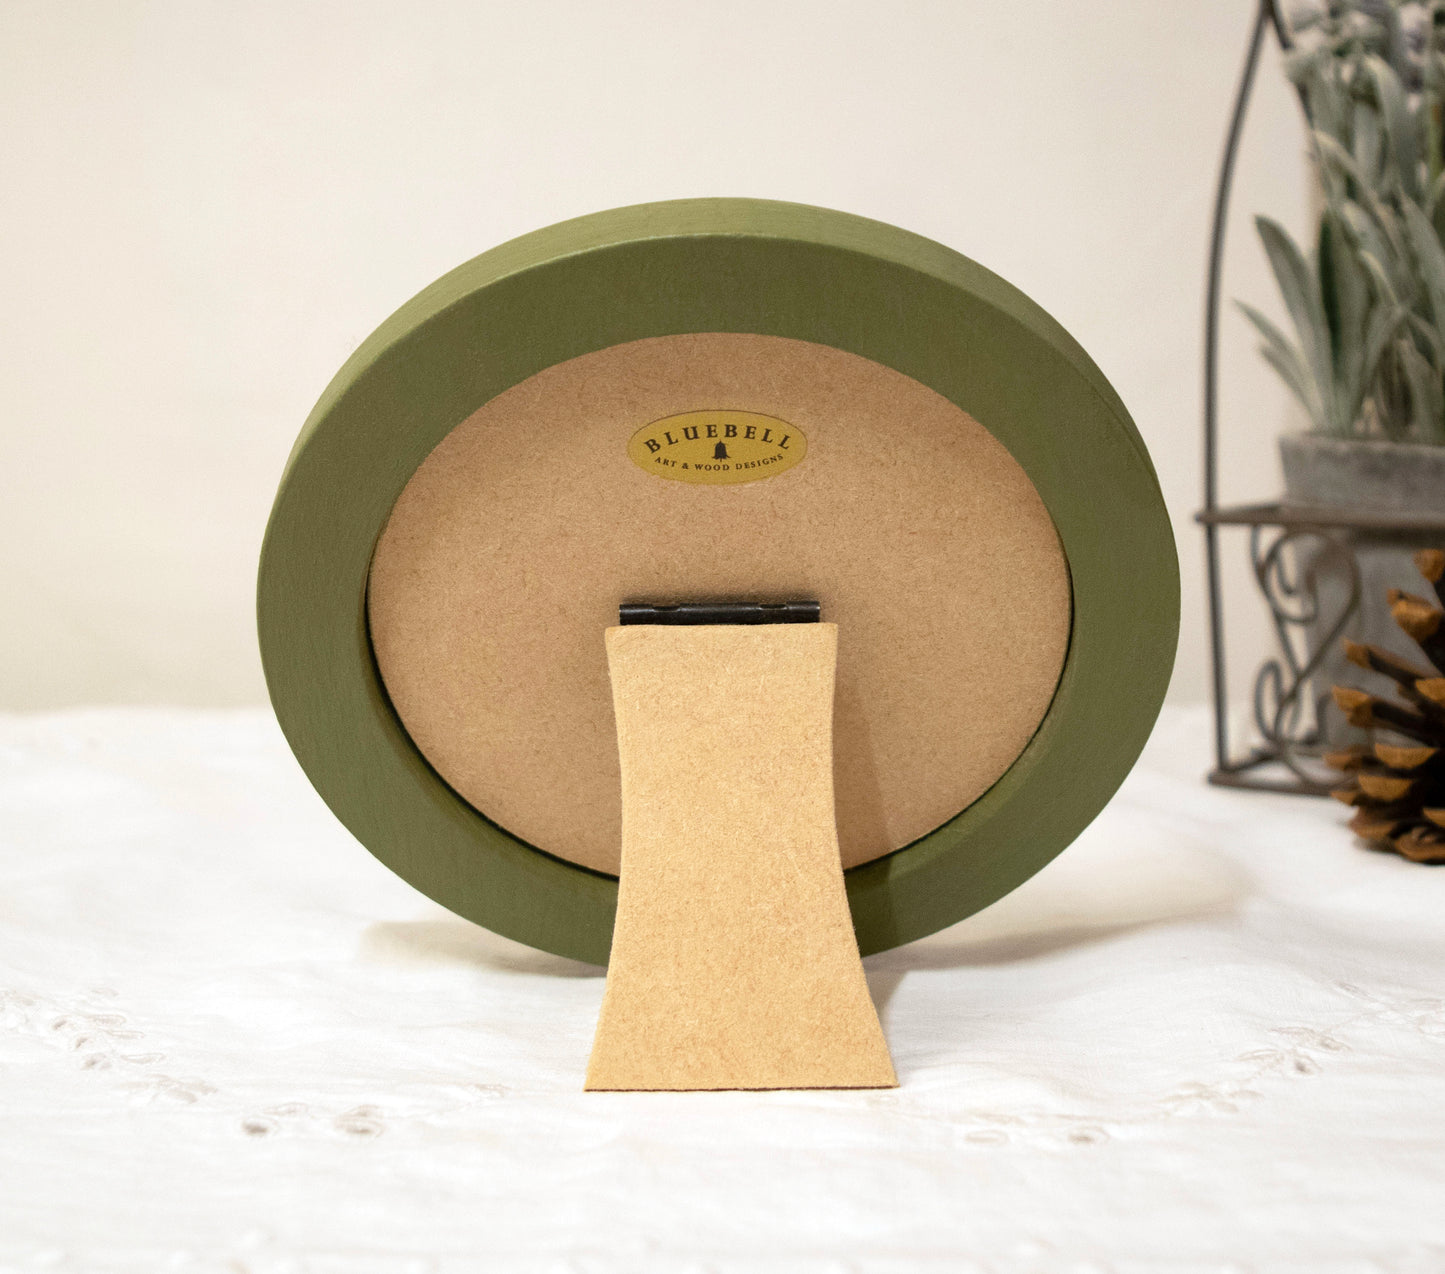 Olive Green 4" x 4" Round Roman Edged Handmade Wooden Photo Picture Frame